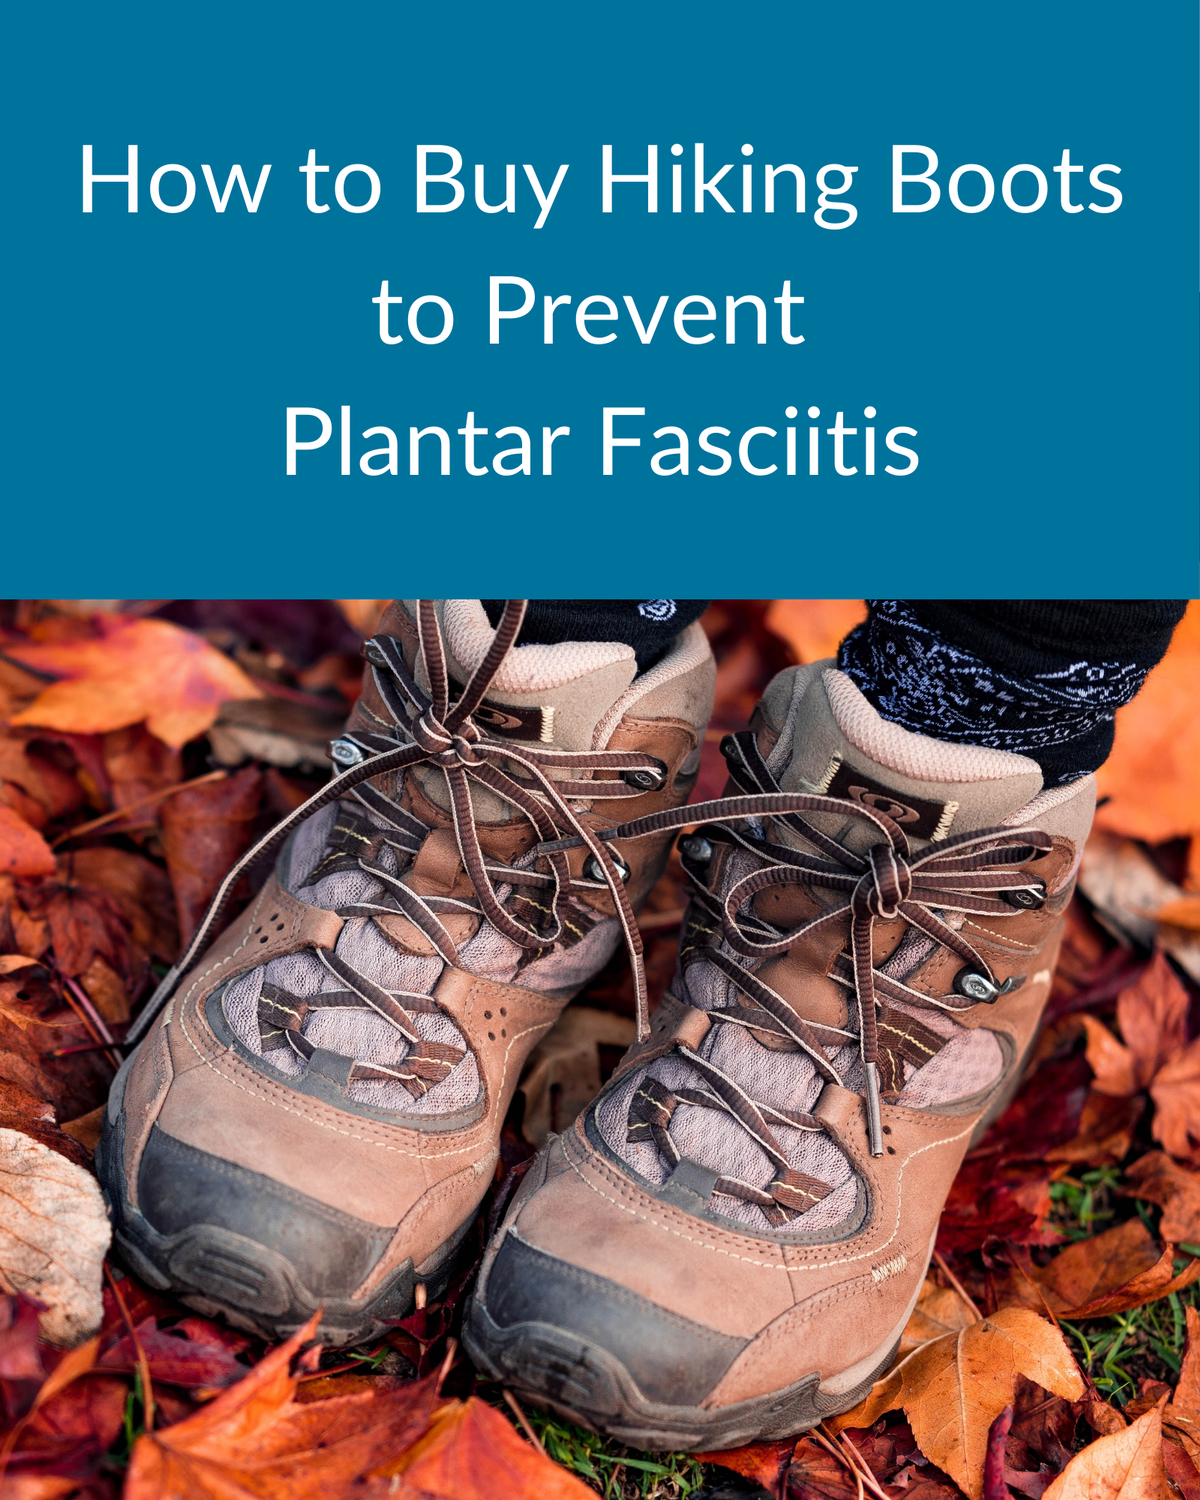 How to Buy Hiking Boots to Prevent Plantar Fasciitis